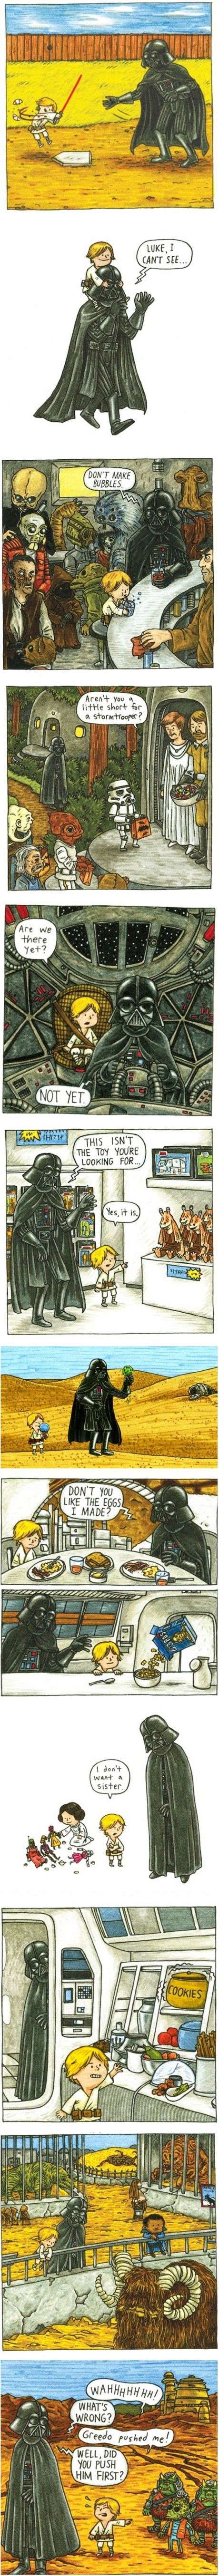 If Darth Vader were a good father.